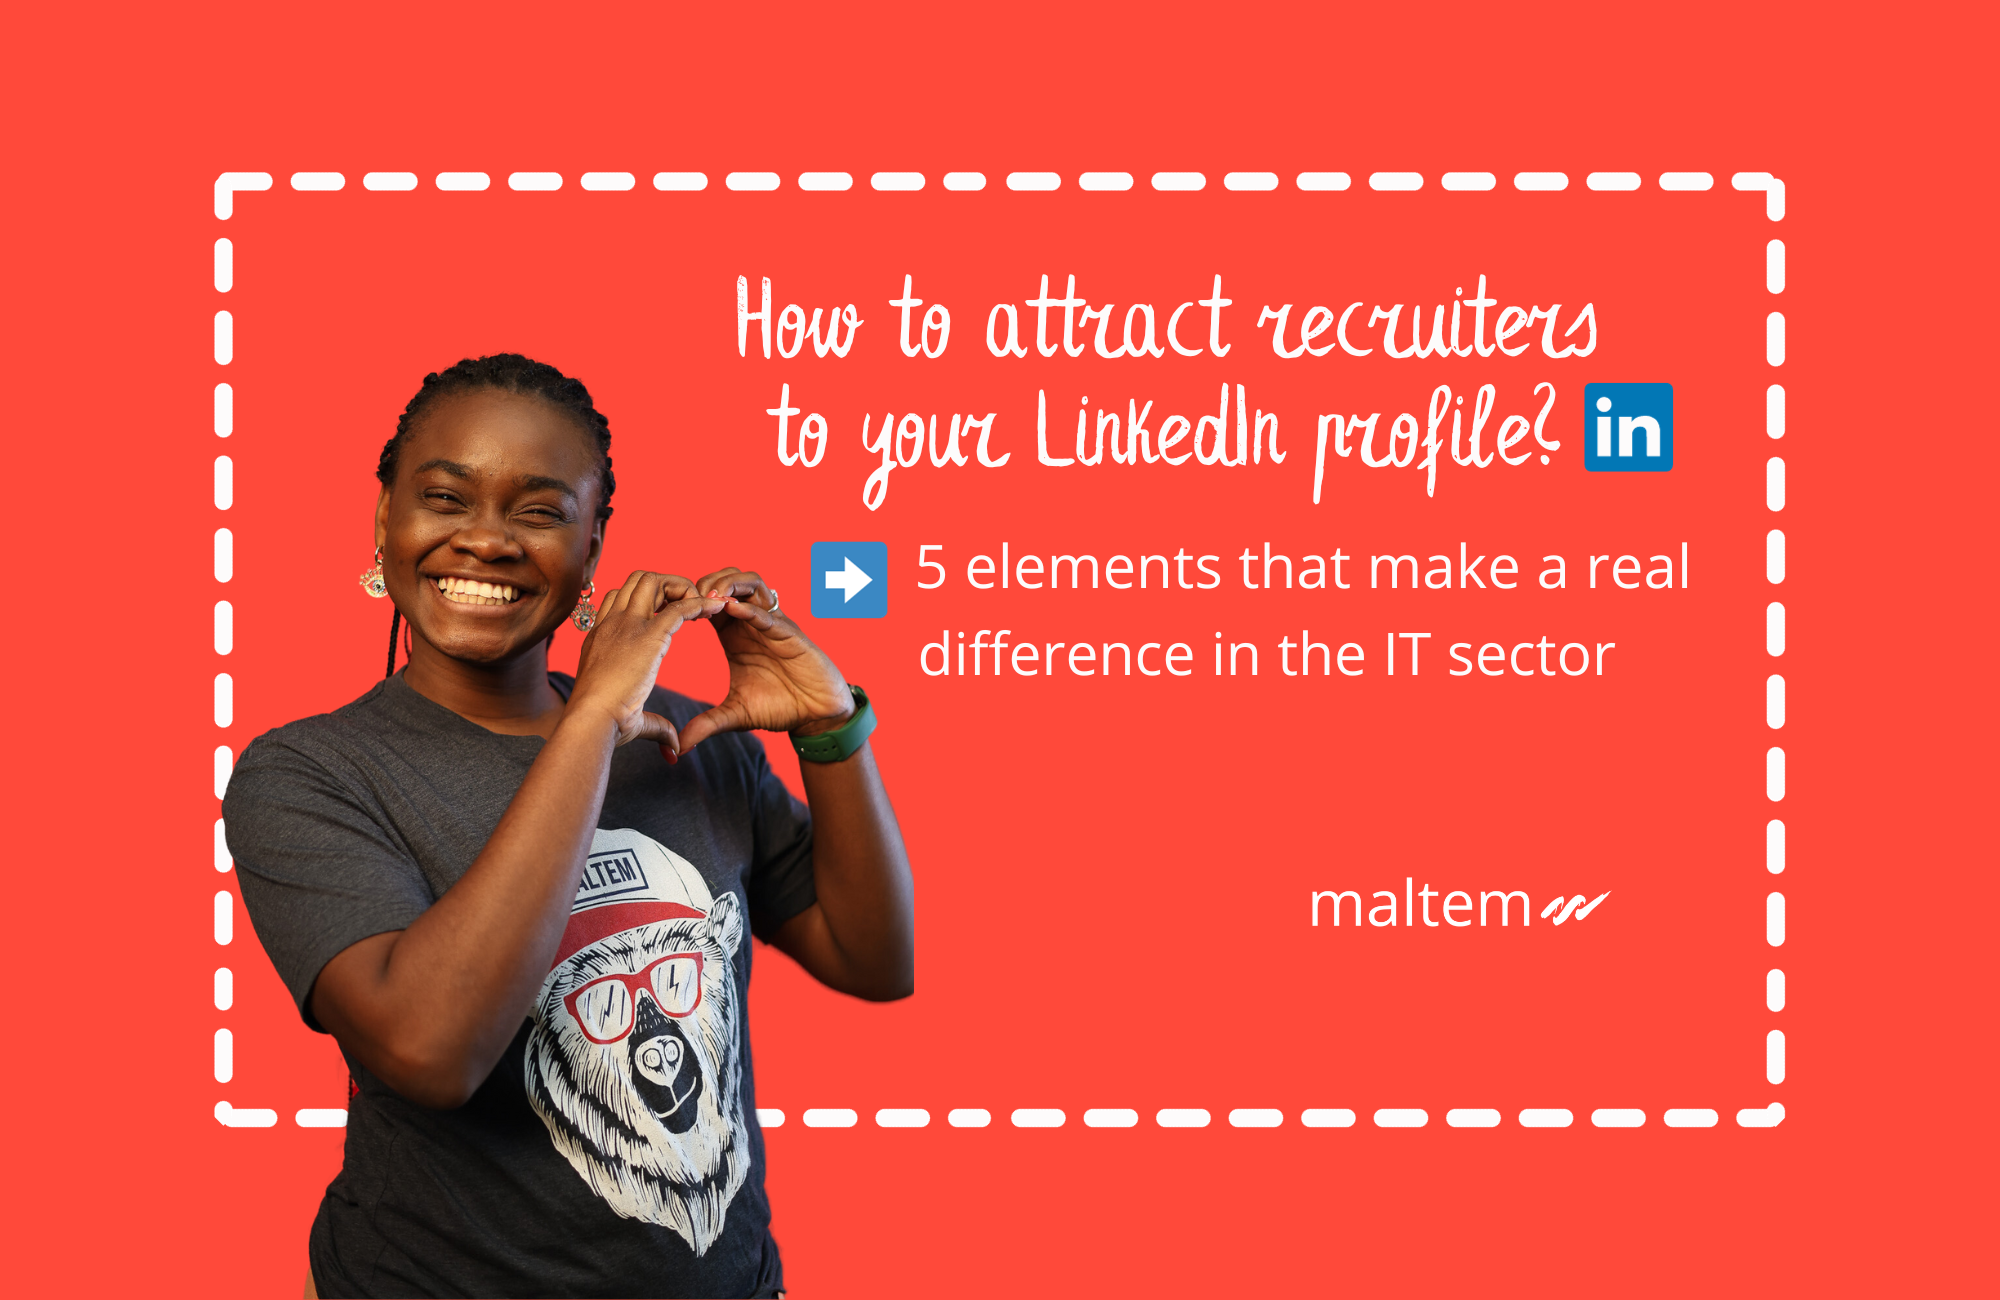 Attracting recruiters to your LinkedIn profile: 5 elements that make a real difference in the IT sector